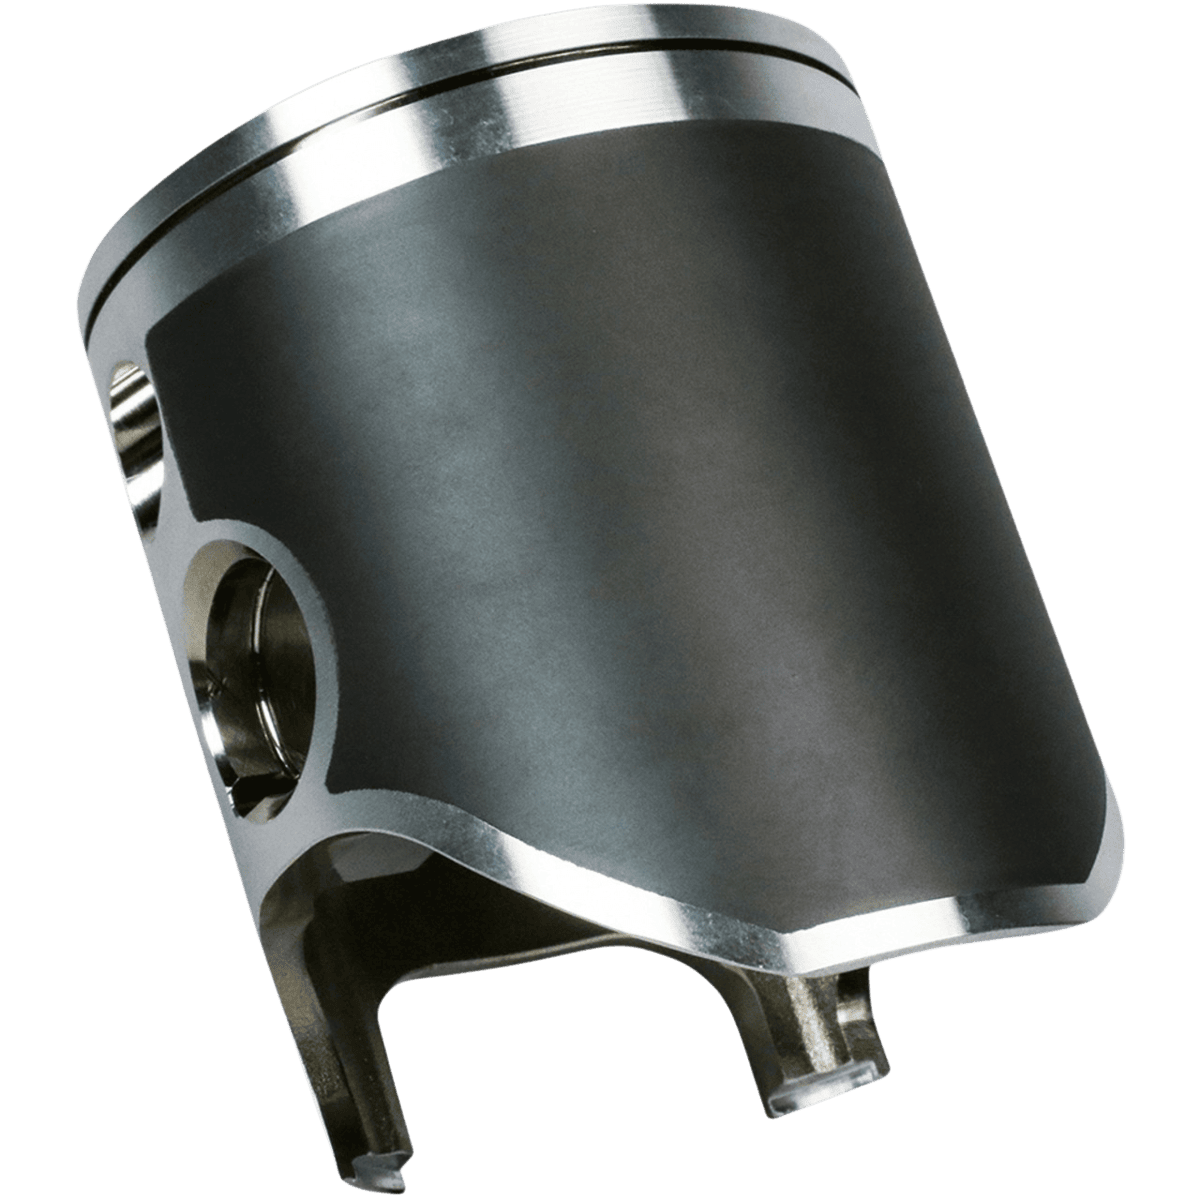 Best 1990 WR125 Piston Kit for Two strokes